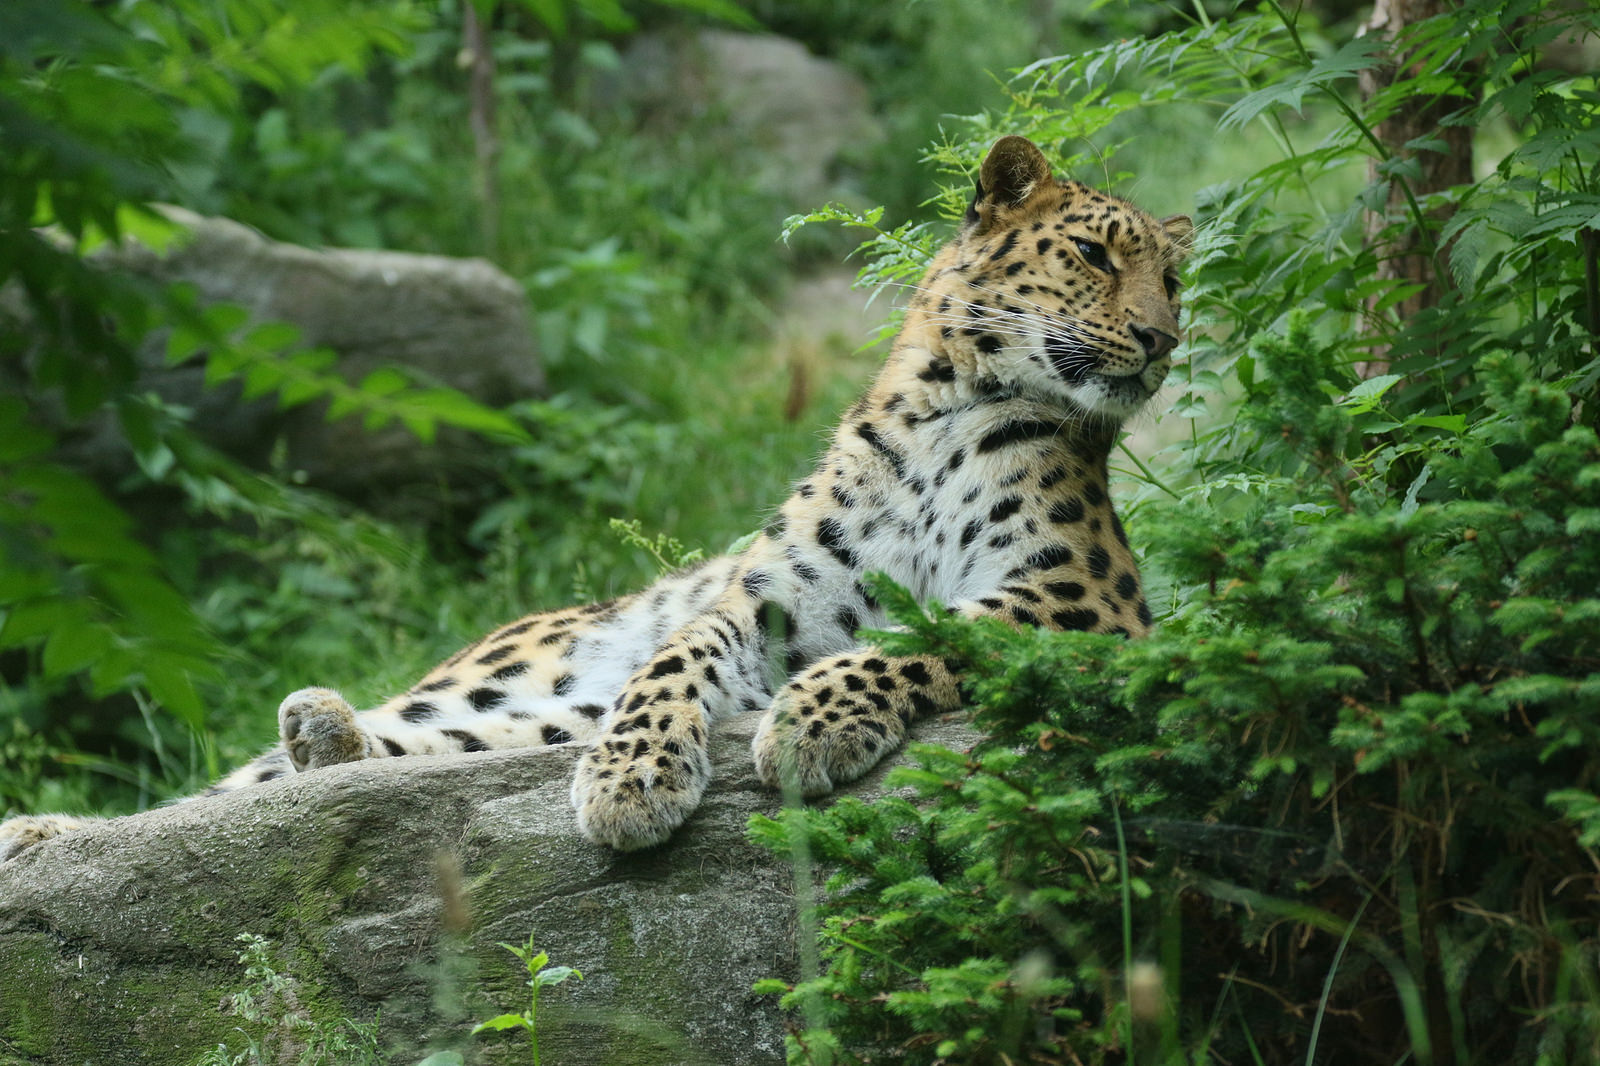 <p>Amur leopards are critically endangered with maybe 60 living in the wild and around 200 in zoos around the world. (Image: zoofanatic)</p>